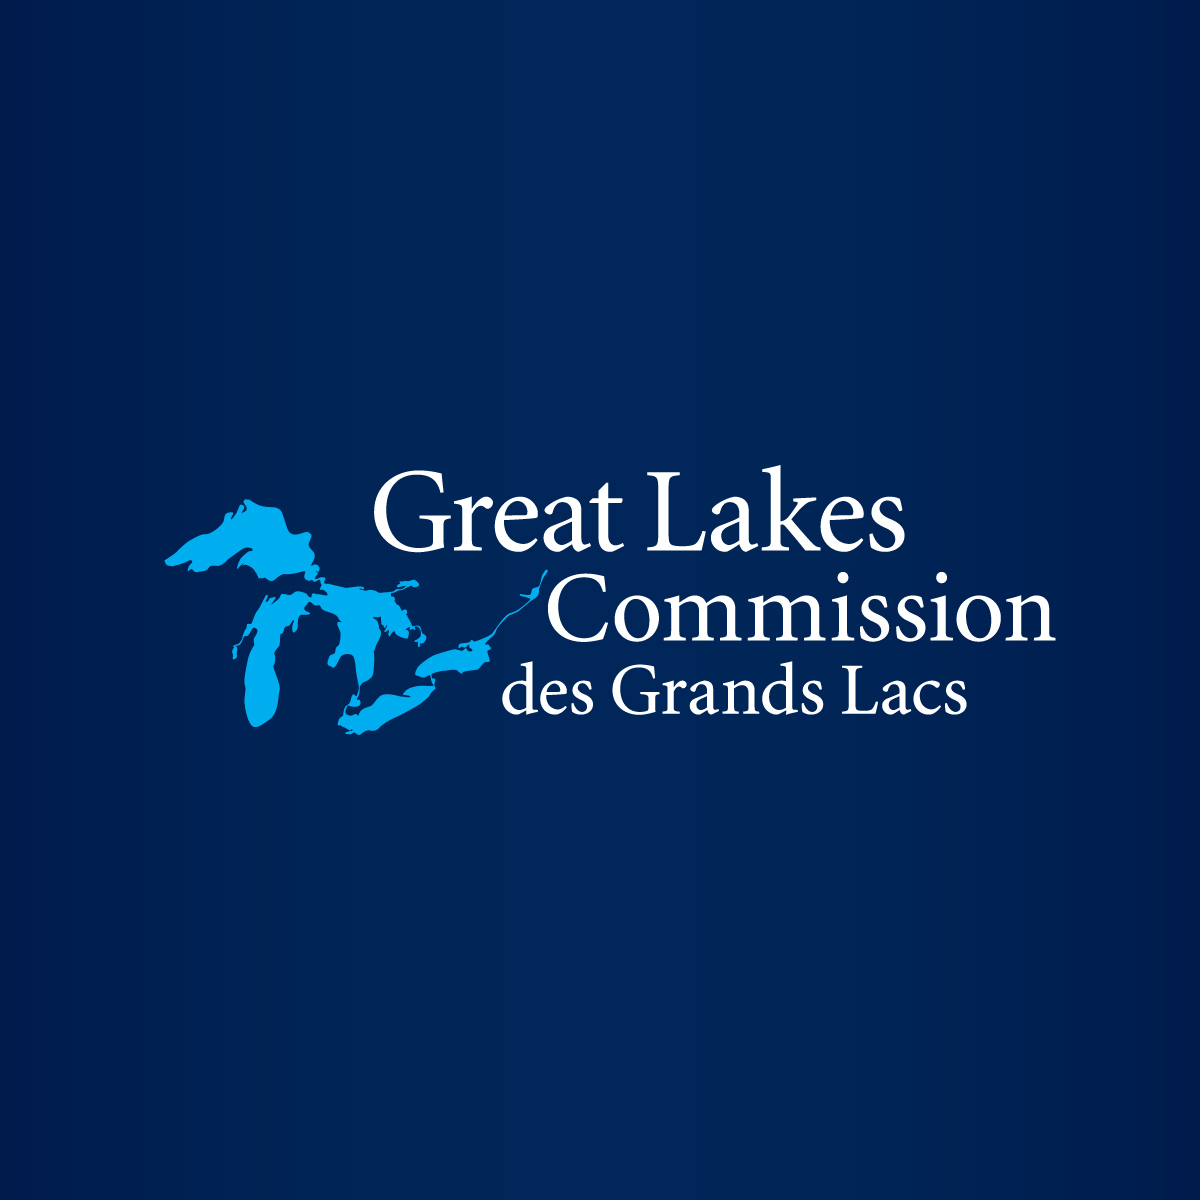 Tribes lead effort to restore, enhance native Great Lakes fish populations